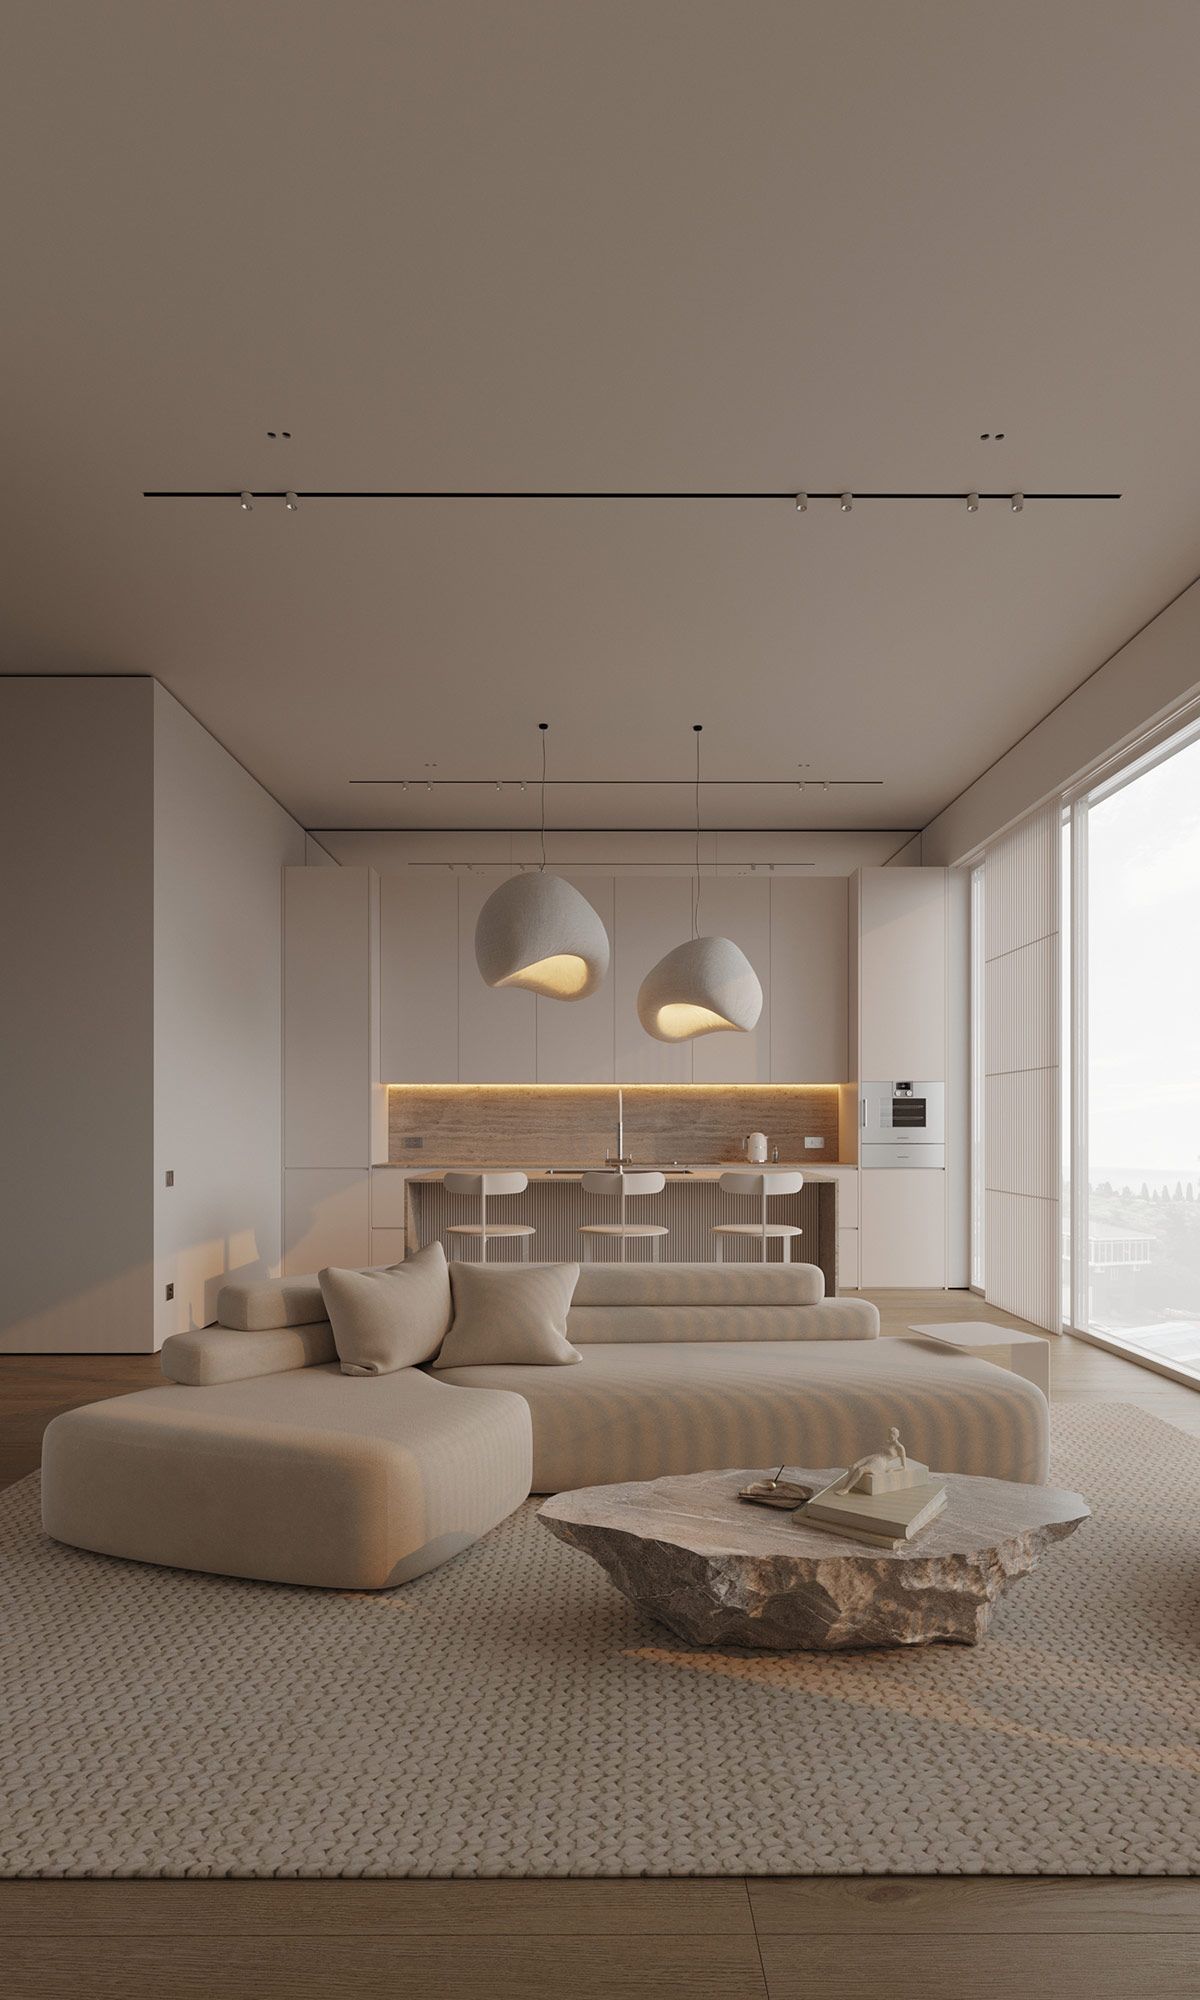 Illuminate Your Space: A Guide to Modern
Lighting Design